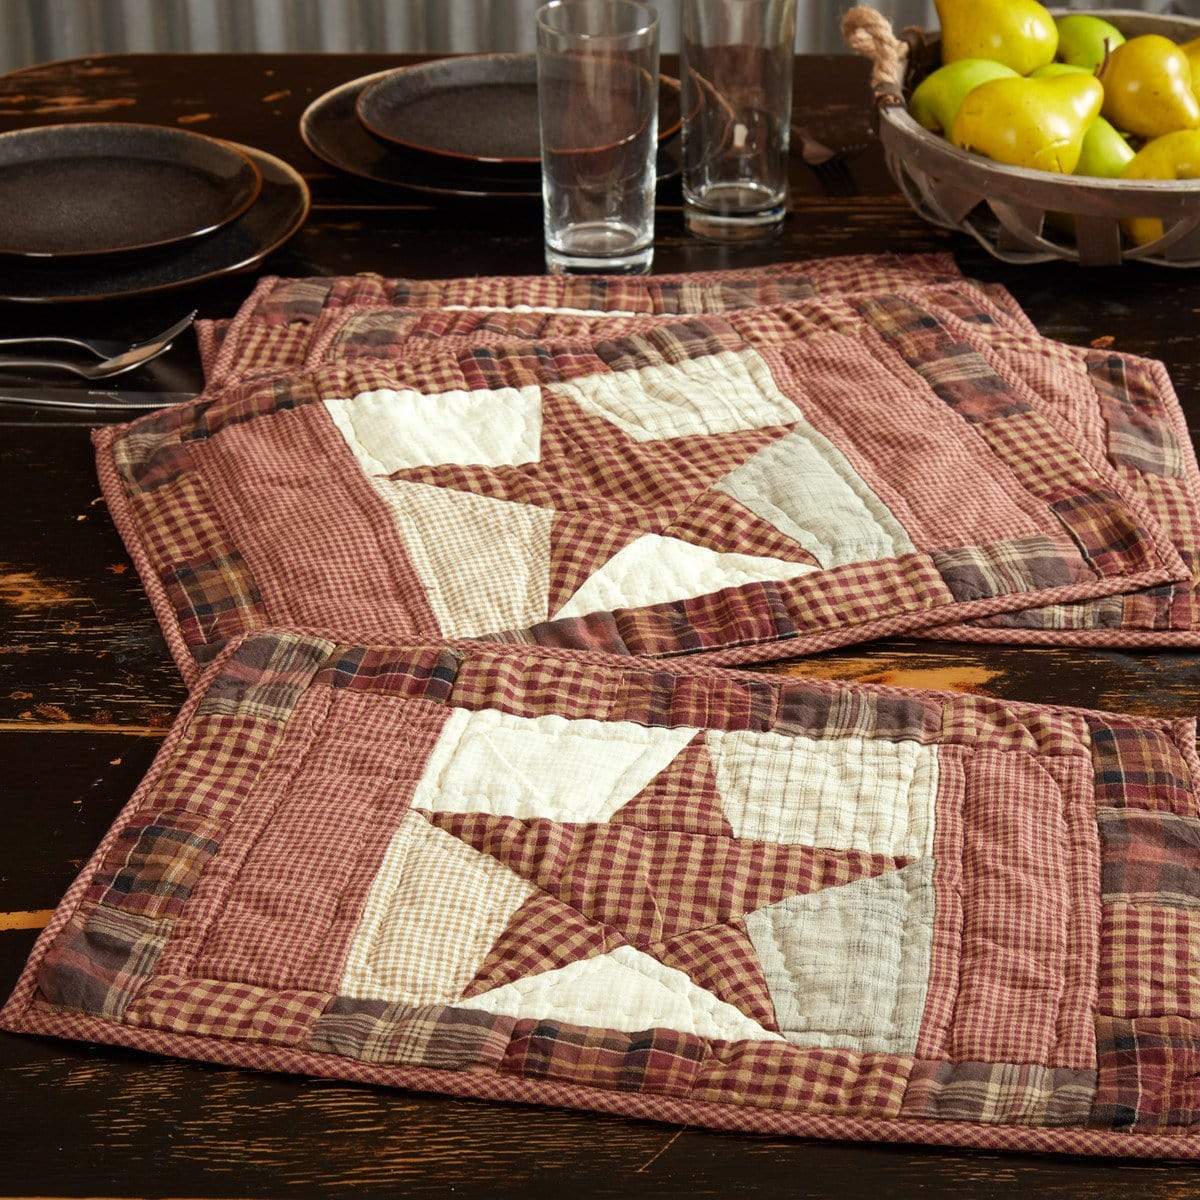 Rustic Western Linens and Decor - Retro Barn Country Linens